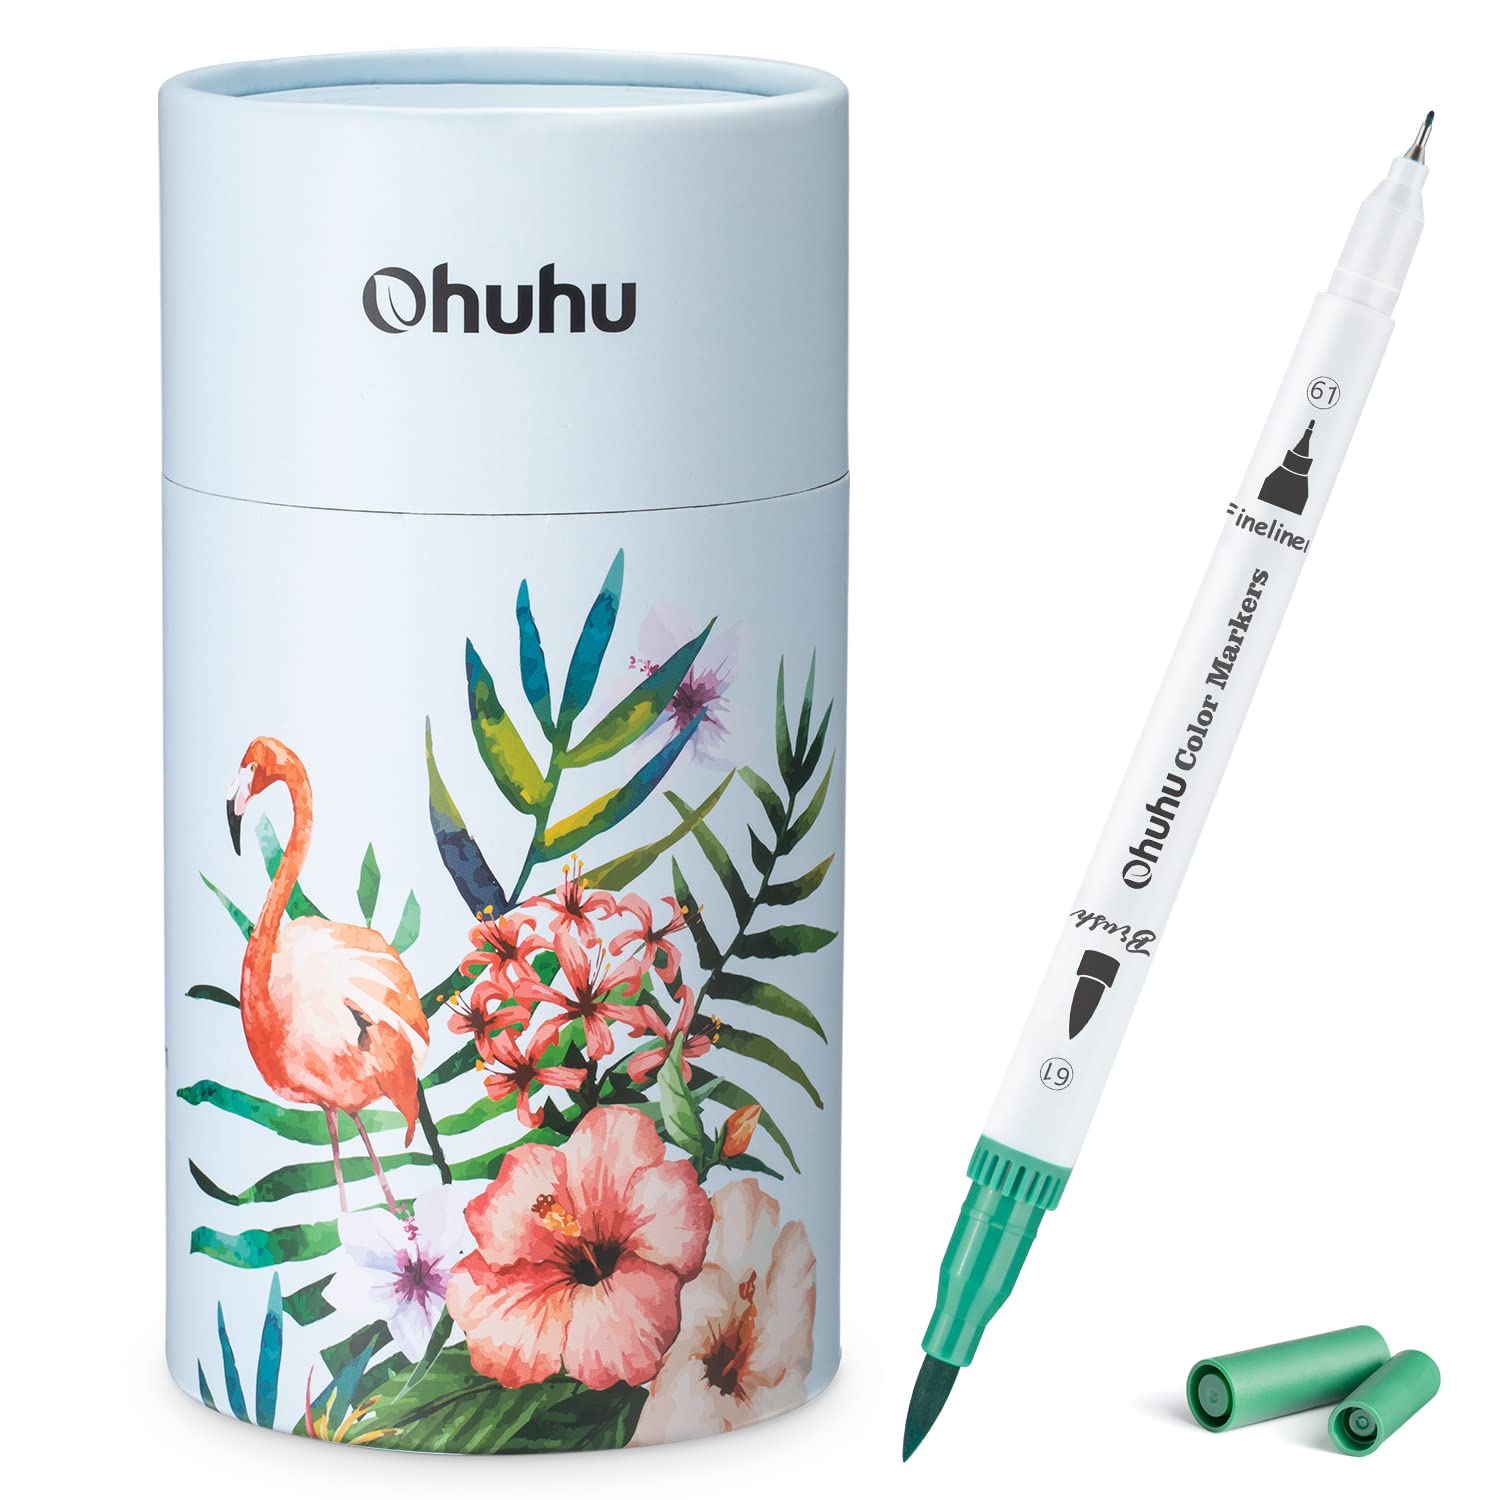 Ohuhu Markers for Adult Coloring Books: 60 Colors Dual Brush Fine Tips Art Marker  Pens - Watercolor Markers for Kids Adults Lettering Drawing Sketching Bullet  Journal - Non-Bleed Non-Toxic - White White Package